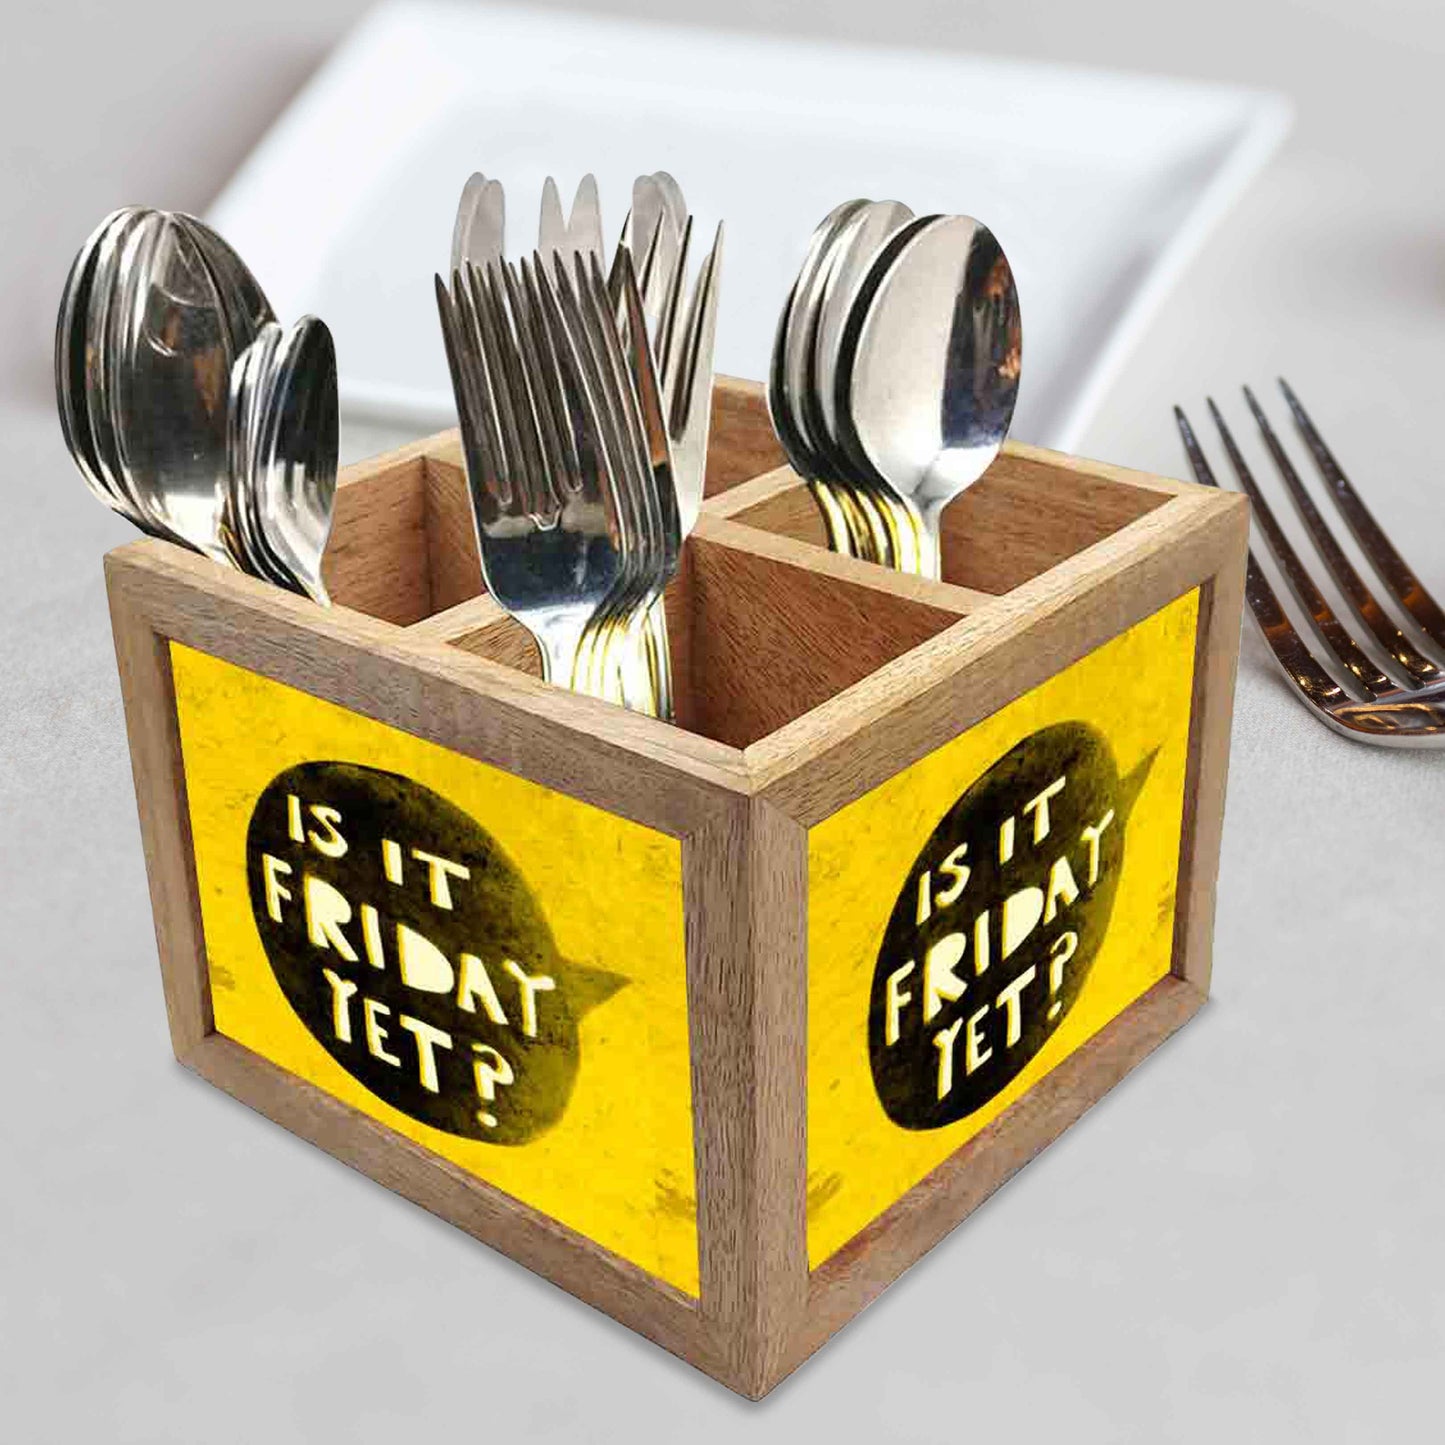 Is It Friday Yet Cutlery Holder Stand Silverware Caddy Organizer for Spoons, Forks & Knives-Made of Pinewood